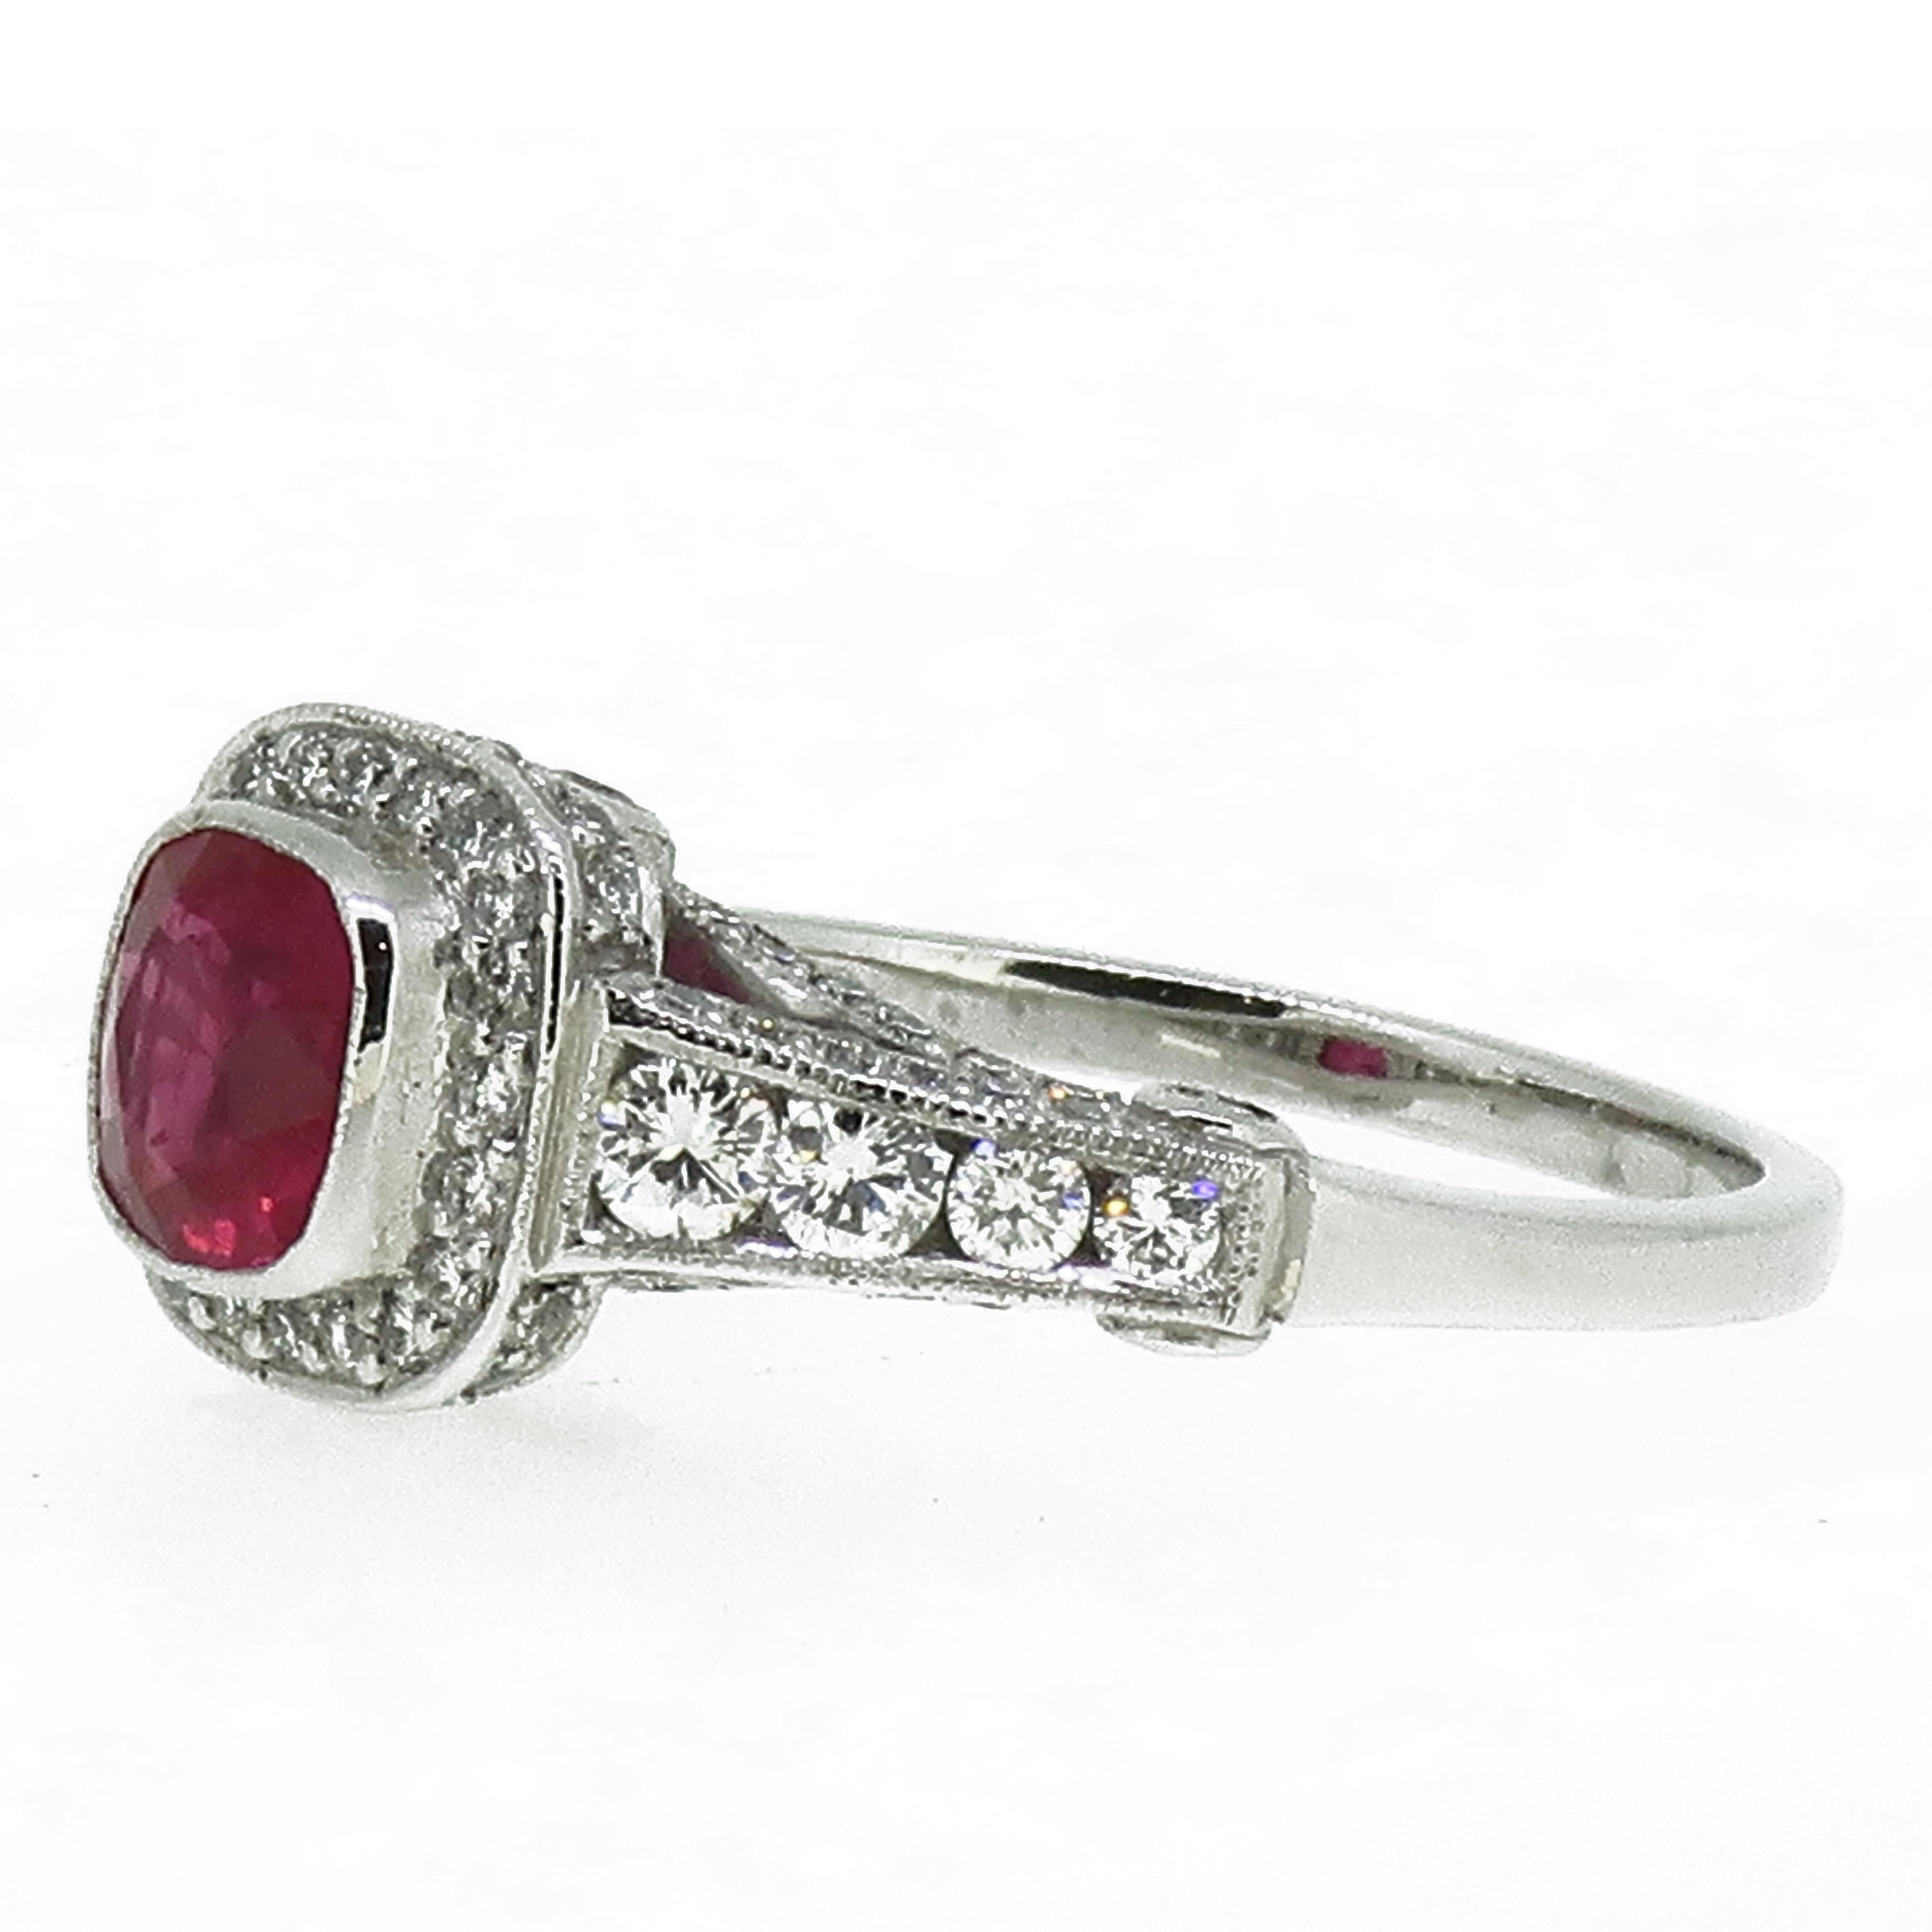 Ruby and Diamond Cluster Ring 18 Karat White Gold

A dazzling cushion cut ruby red ruby & diamond cluster ring. Central cushion cut ruby framed by a border of small but super sparkly brilliant cut diamond, further diamonds around the head and also